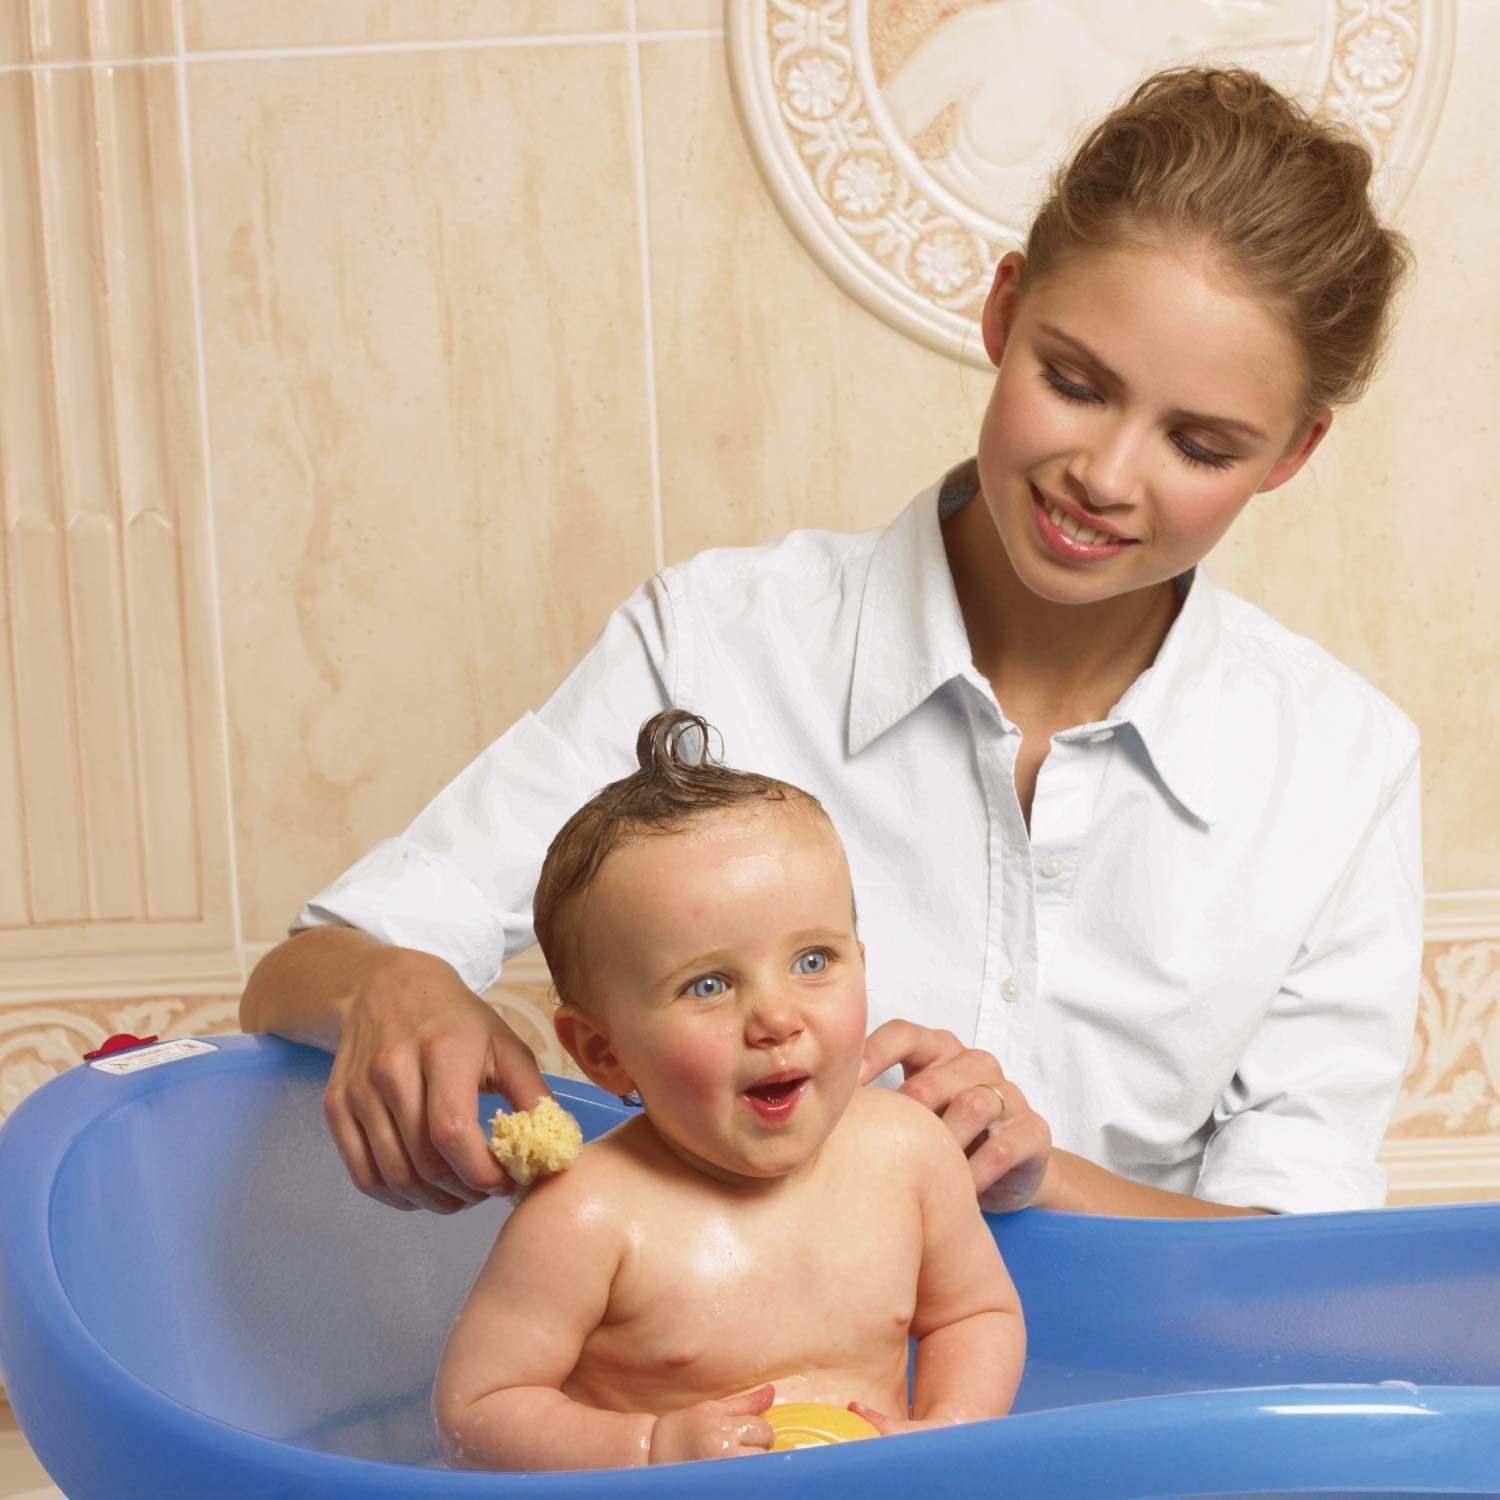 How to Bathe A Newborn Baby At Home